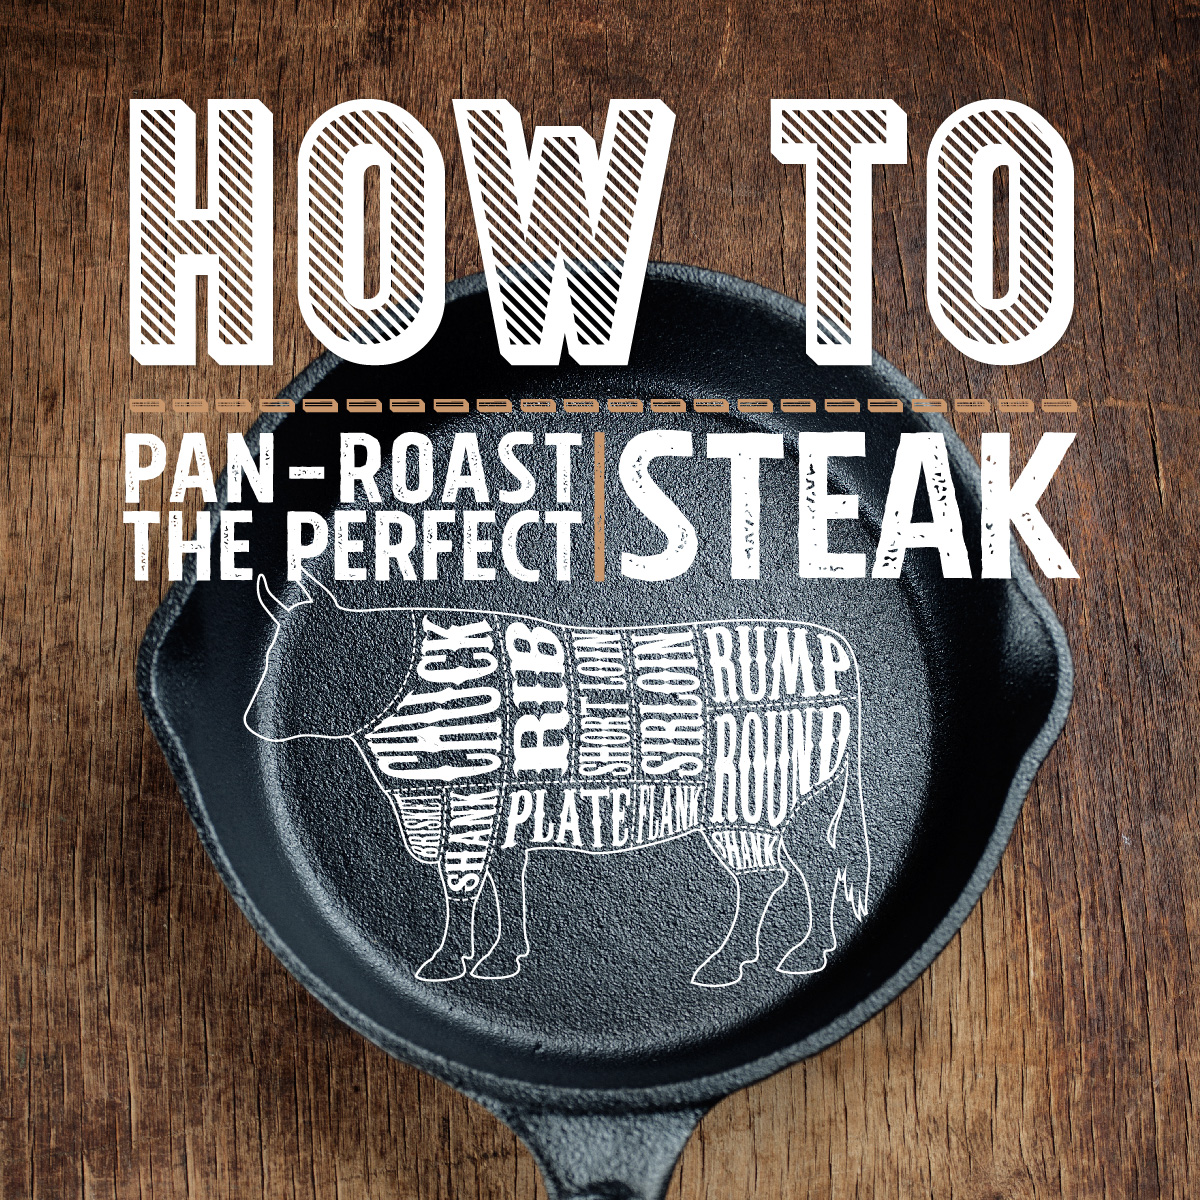 How To Pan-roast the Perfect Steak